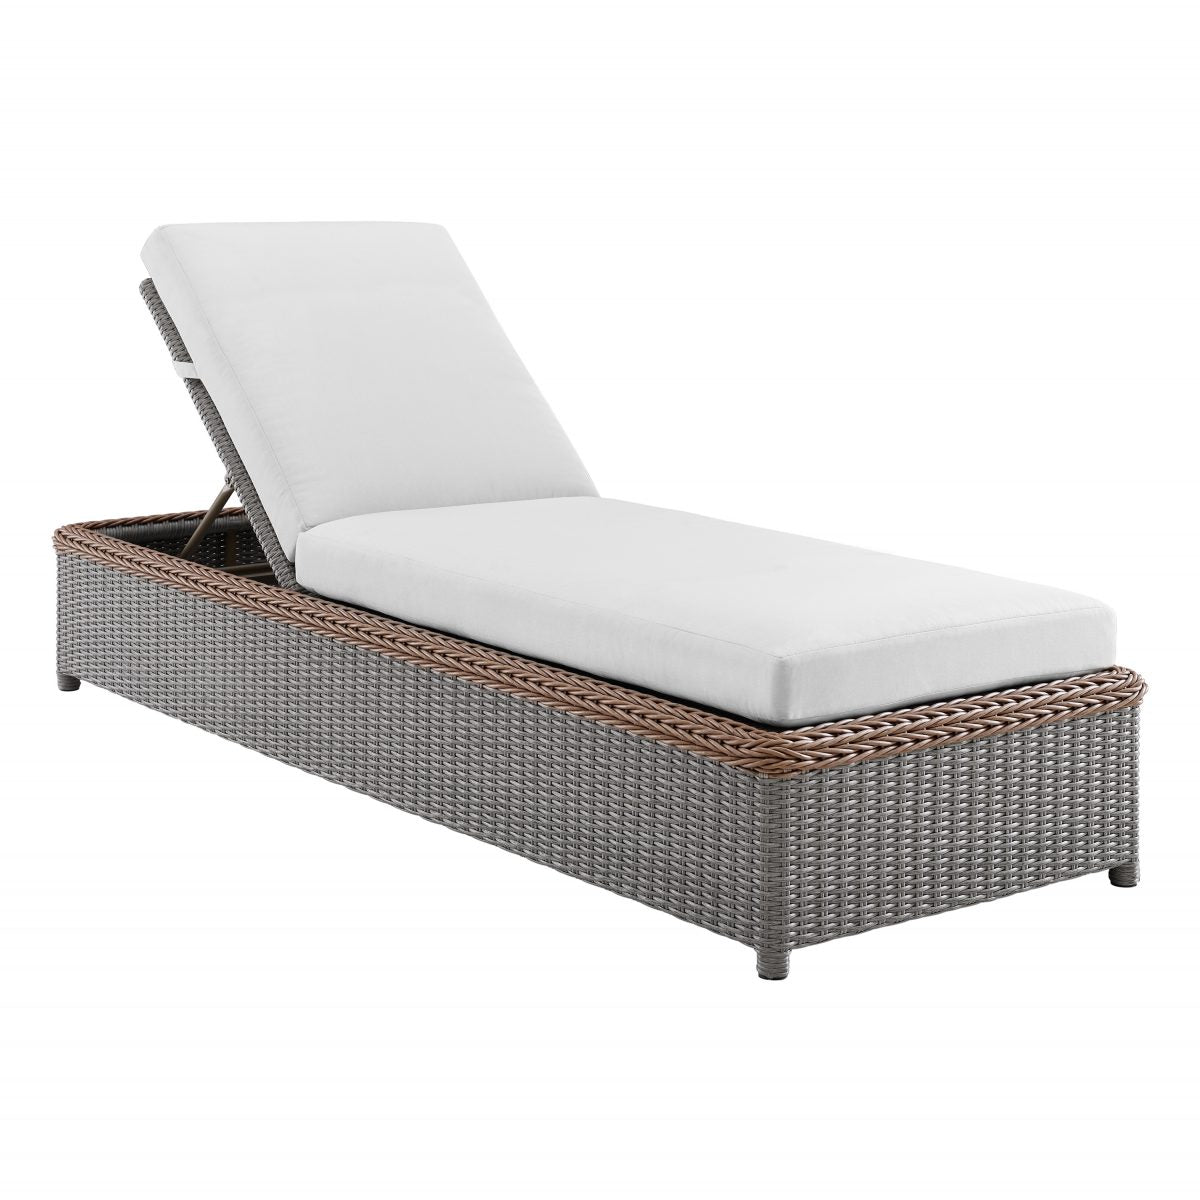 Centaurus Collection - 3-Piece Chaise Loungers